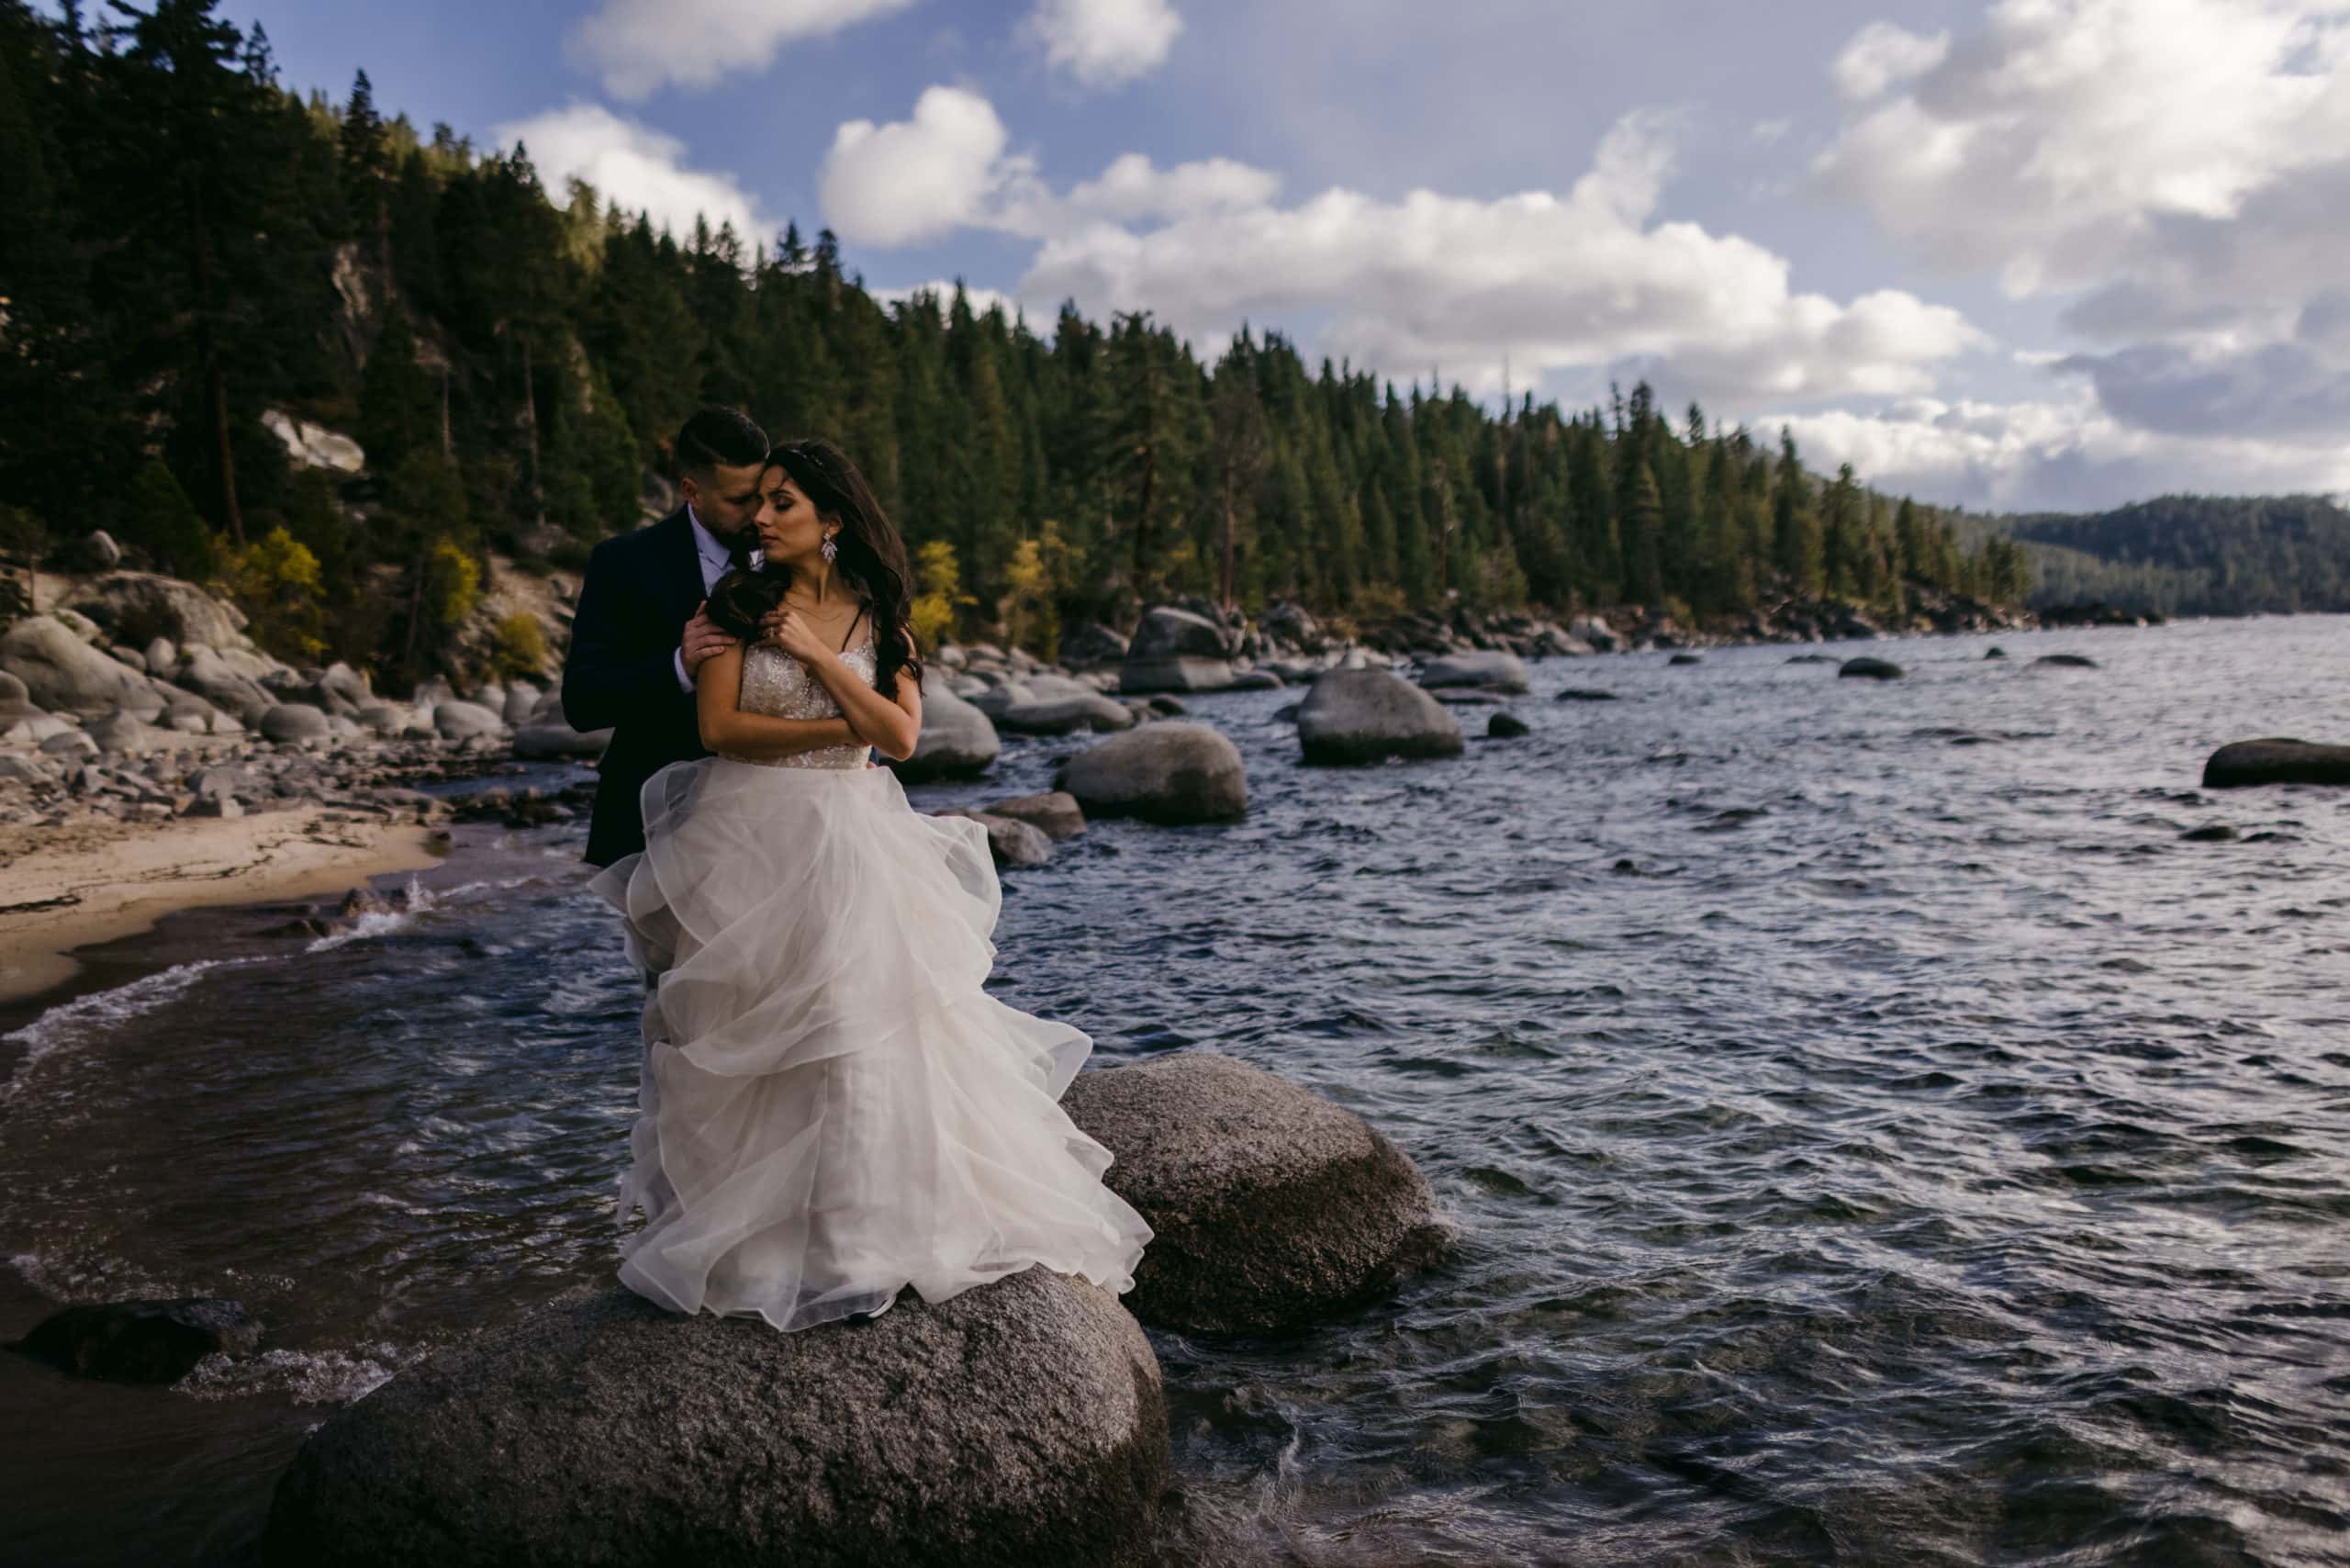 A bride and groom that discovered how to elope in California.